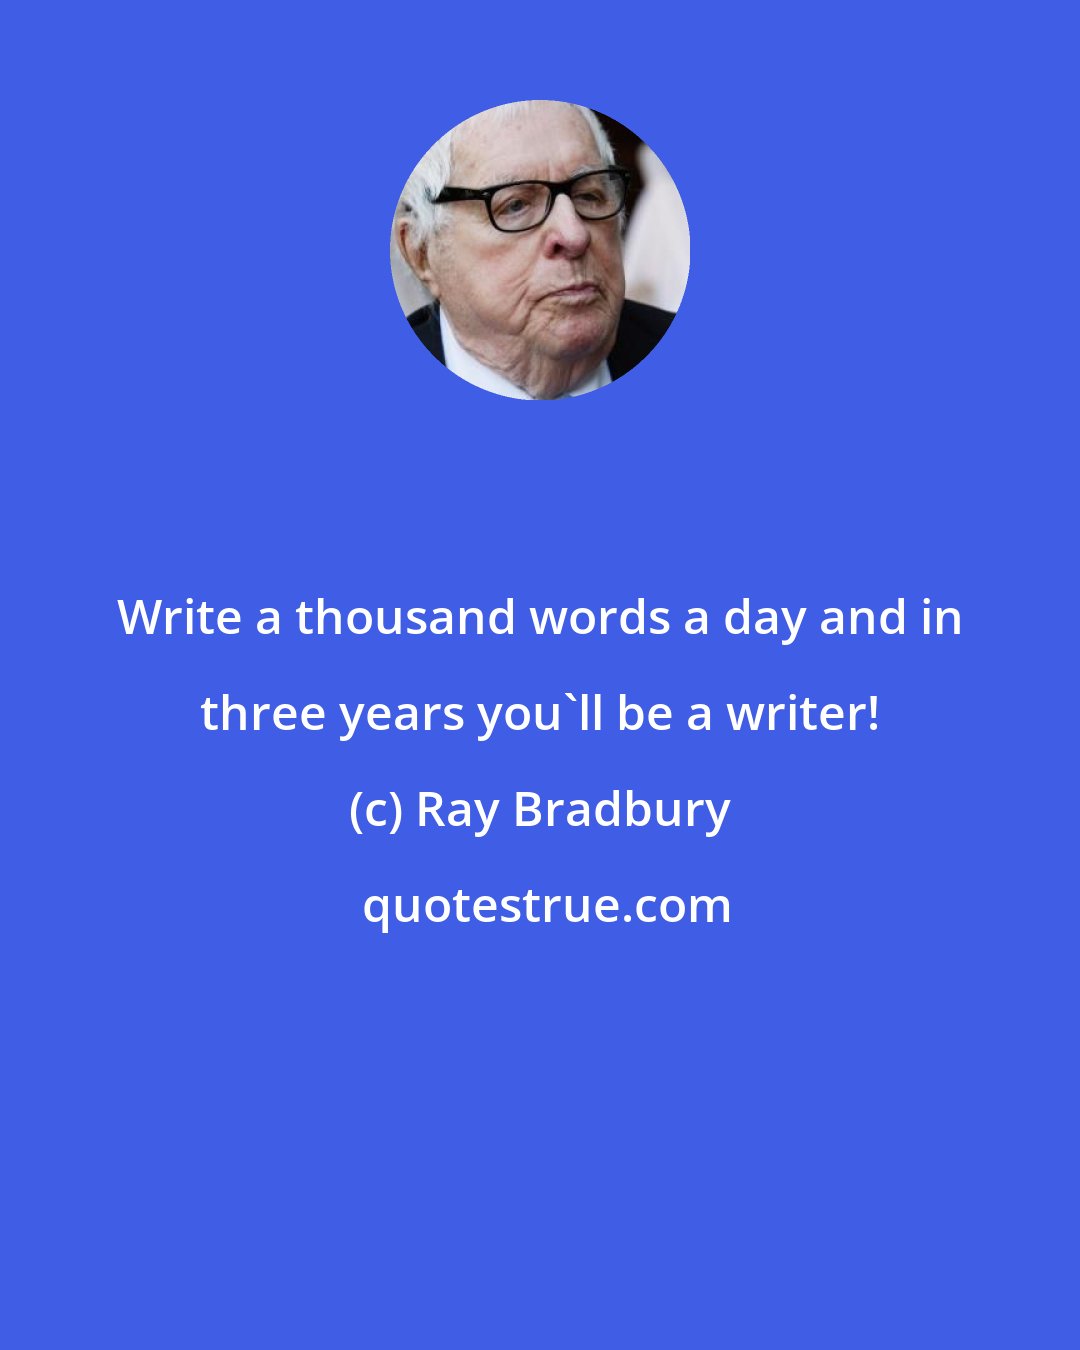 Ray Bradbury: Write a thousand words a day and in three years you'll be a writer!